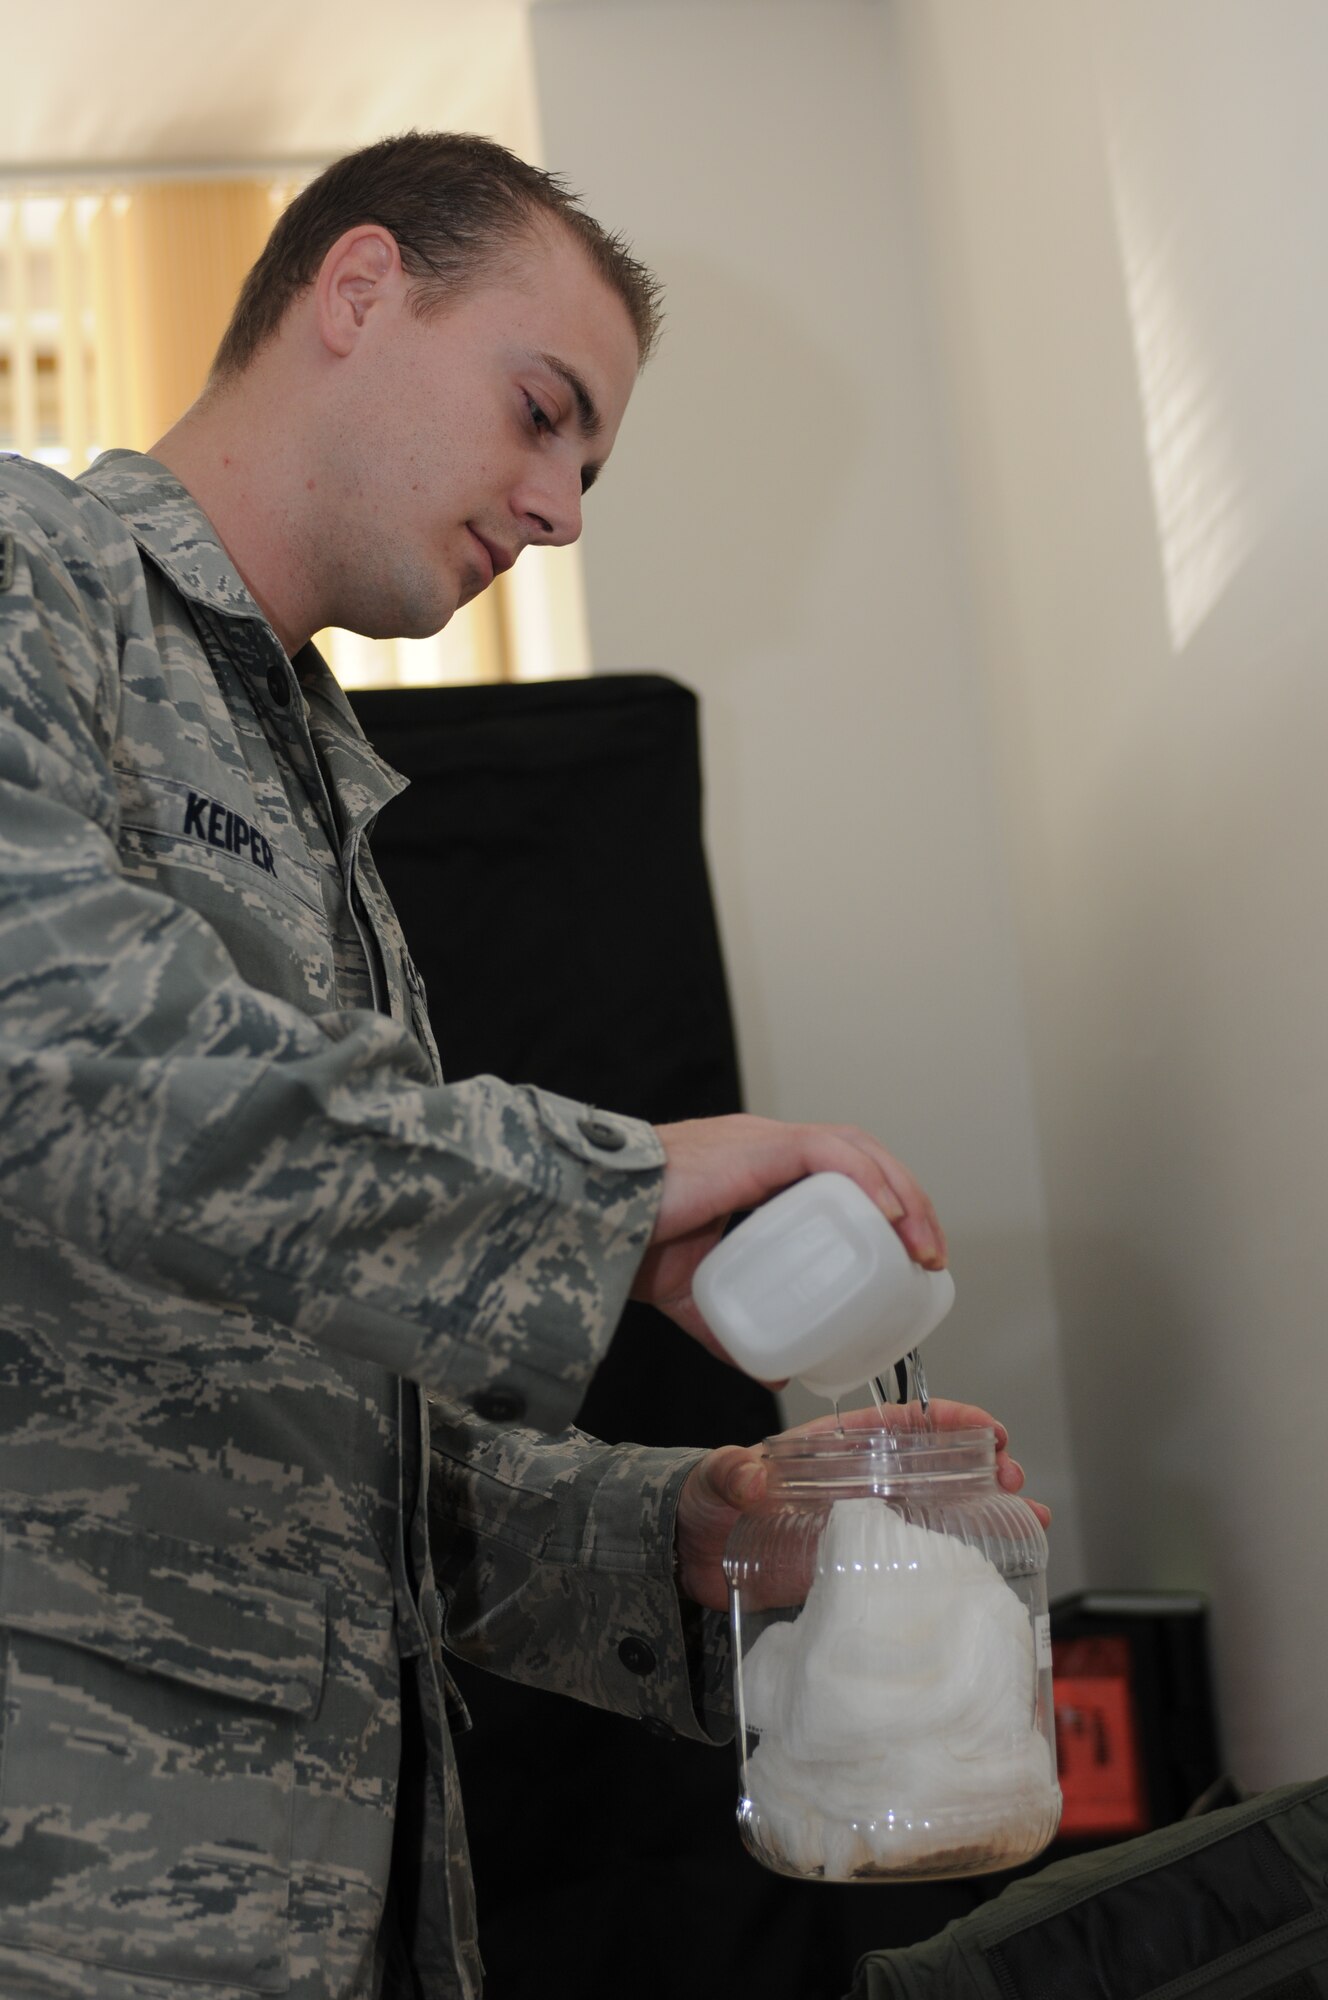 NAMEST AIR BASE, Czech Republic -- Senior Airman Brandon Keiper, 52nd Operations Support Squadron flight crew equipment maintainer, pours cleaning alcohol into a jar of cotton swabs used to clean flight equipment as part of a 30-day inspection Sept. 10, during Ramstein Rover 2012 here. RARO 12 is a NATO partnership building exercise invlolving more than 16 nations. A-10 Thunderbolt IIs from the 81st Fighter Squadron are providing close air support to partnering nations and practicing forward air control missions with their NATO allies in international security assistance force realistic scenarios throughtout the exercise. Participating in exercises like RARO 12 ensures effective employment of airpower in support of alliance or coalition forces while mitigating risks to civilians in contingency operations. (U.S. Air Force photo by Senior Airman Natasha Stannard/Released)